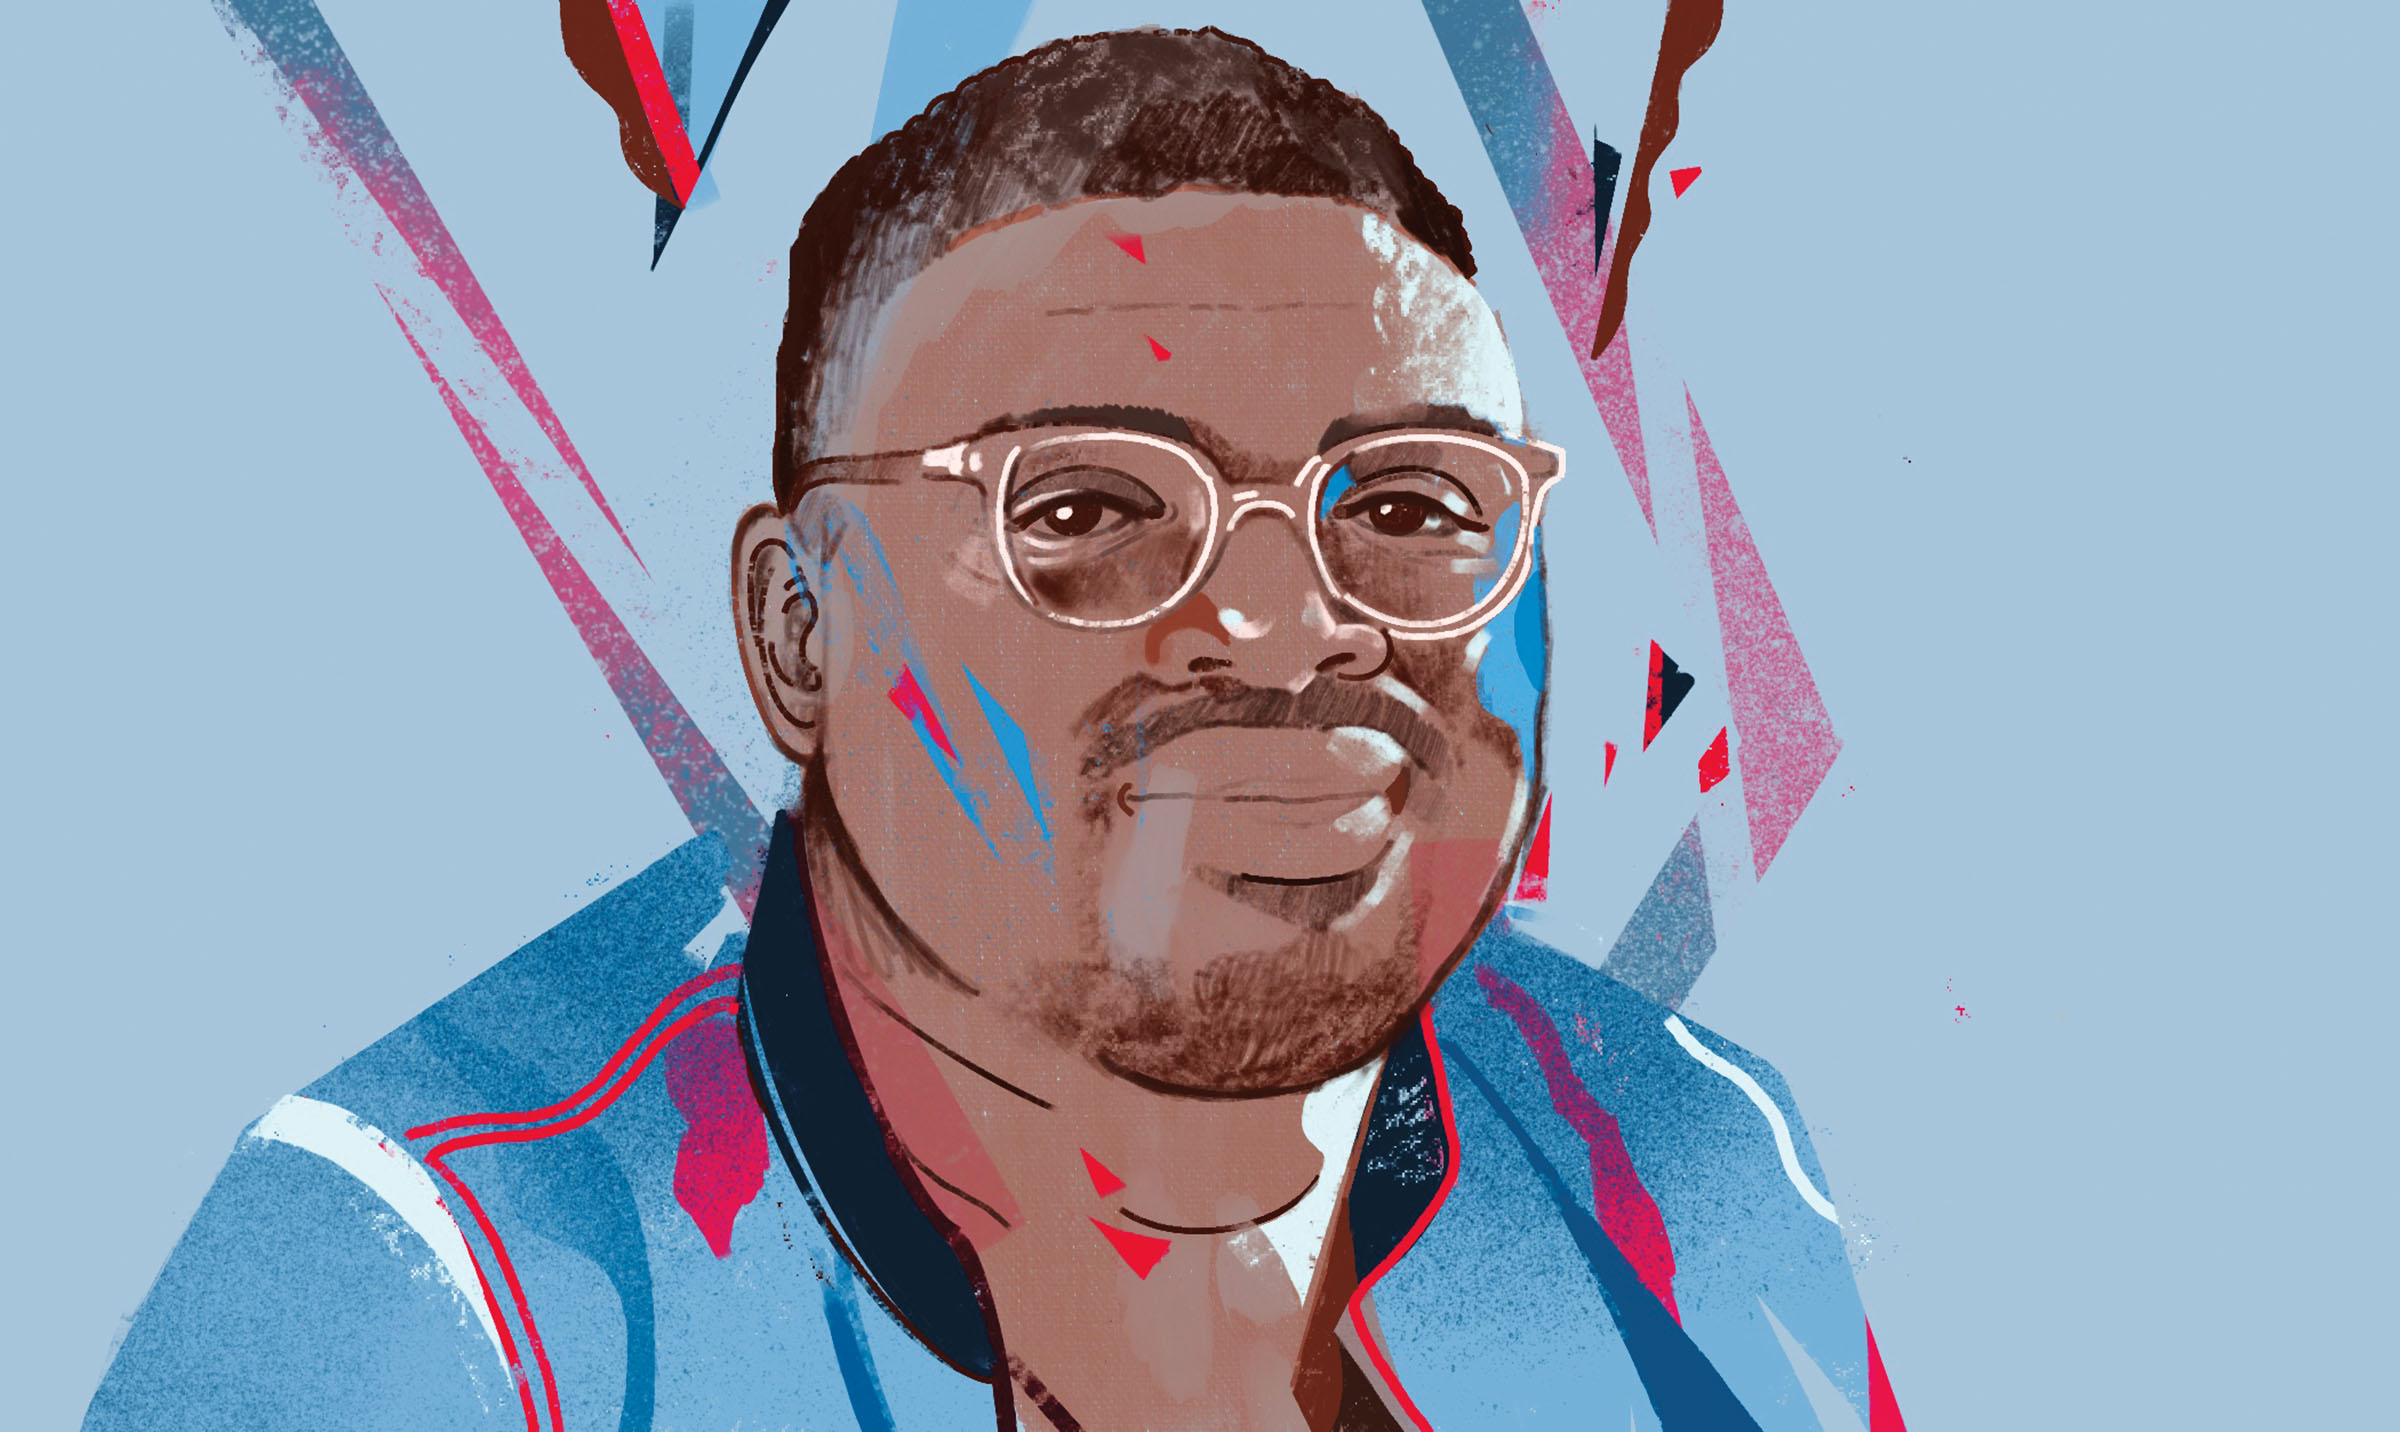 An illustration of writer Bryan Washington in a blue shirt and light blue background